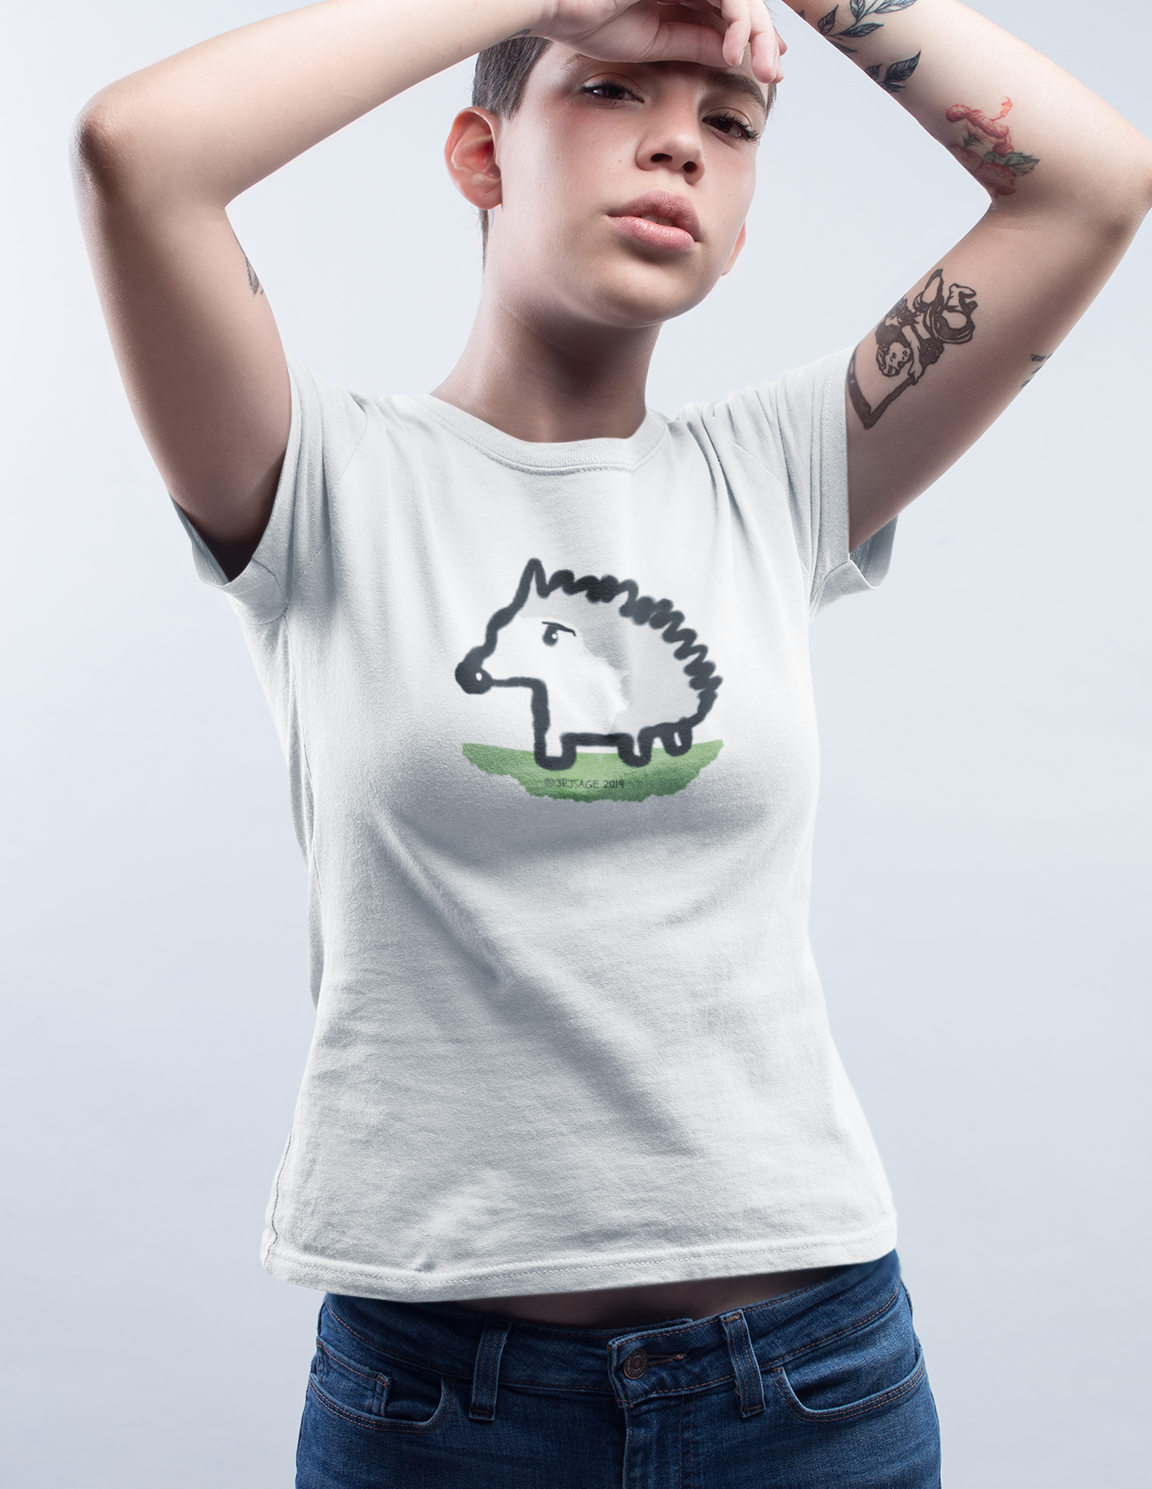 Baby Hedgehog T-shirt - Young woman wearing a cute illustrated baby hedgehog t-shirt vegan cotton by Hector and Bone